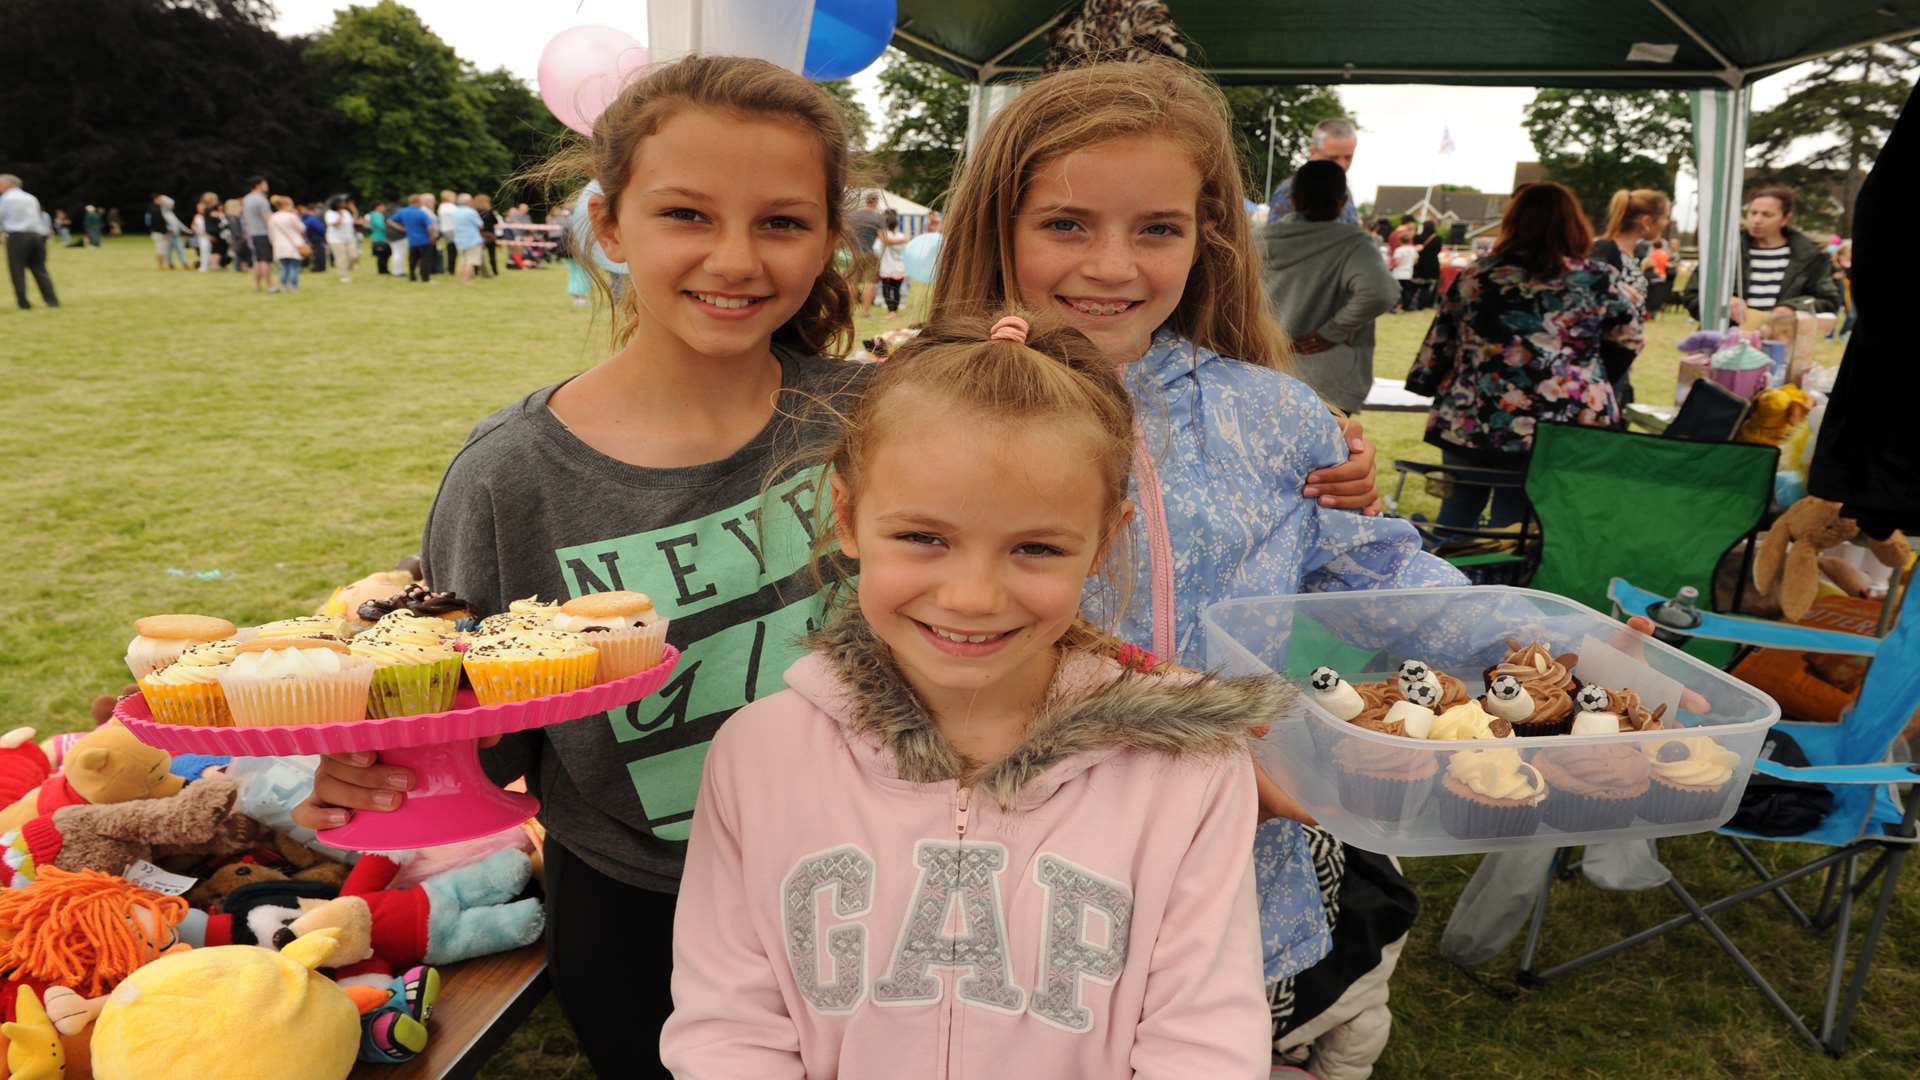 Darent Valley Hospital, Dartford. Stride4Life fun day. Neve and Layla-Rose (11,10) with Amy (8) at the cake stall.